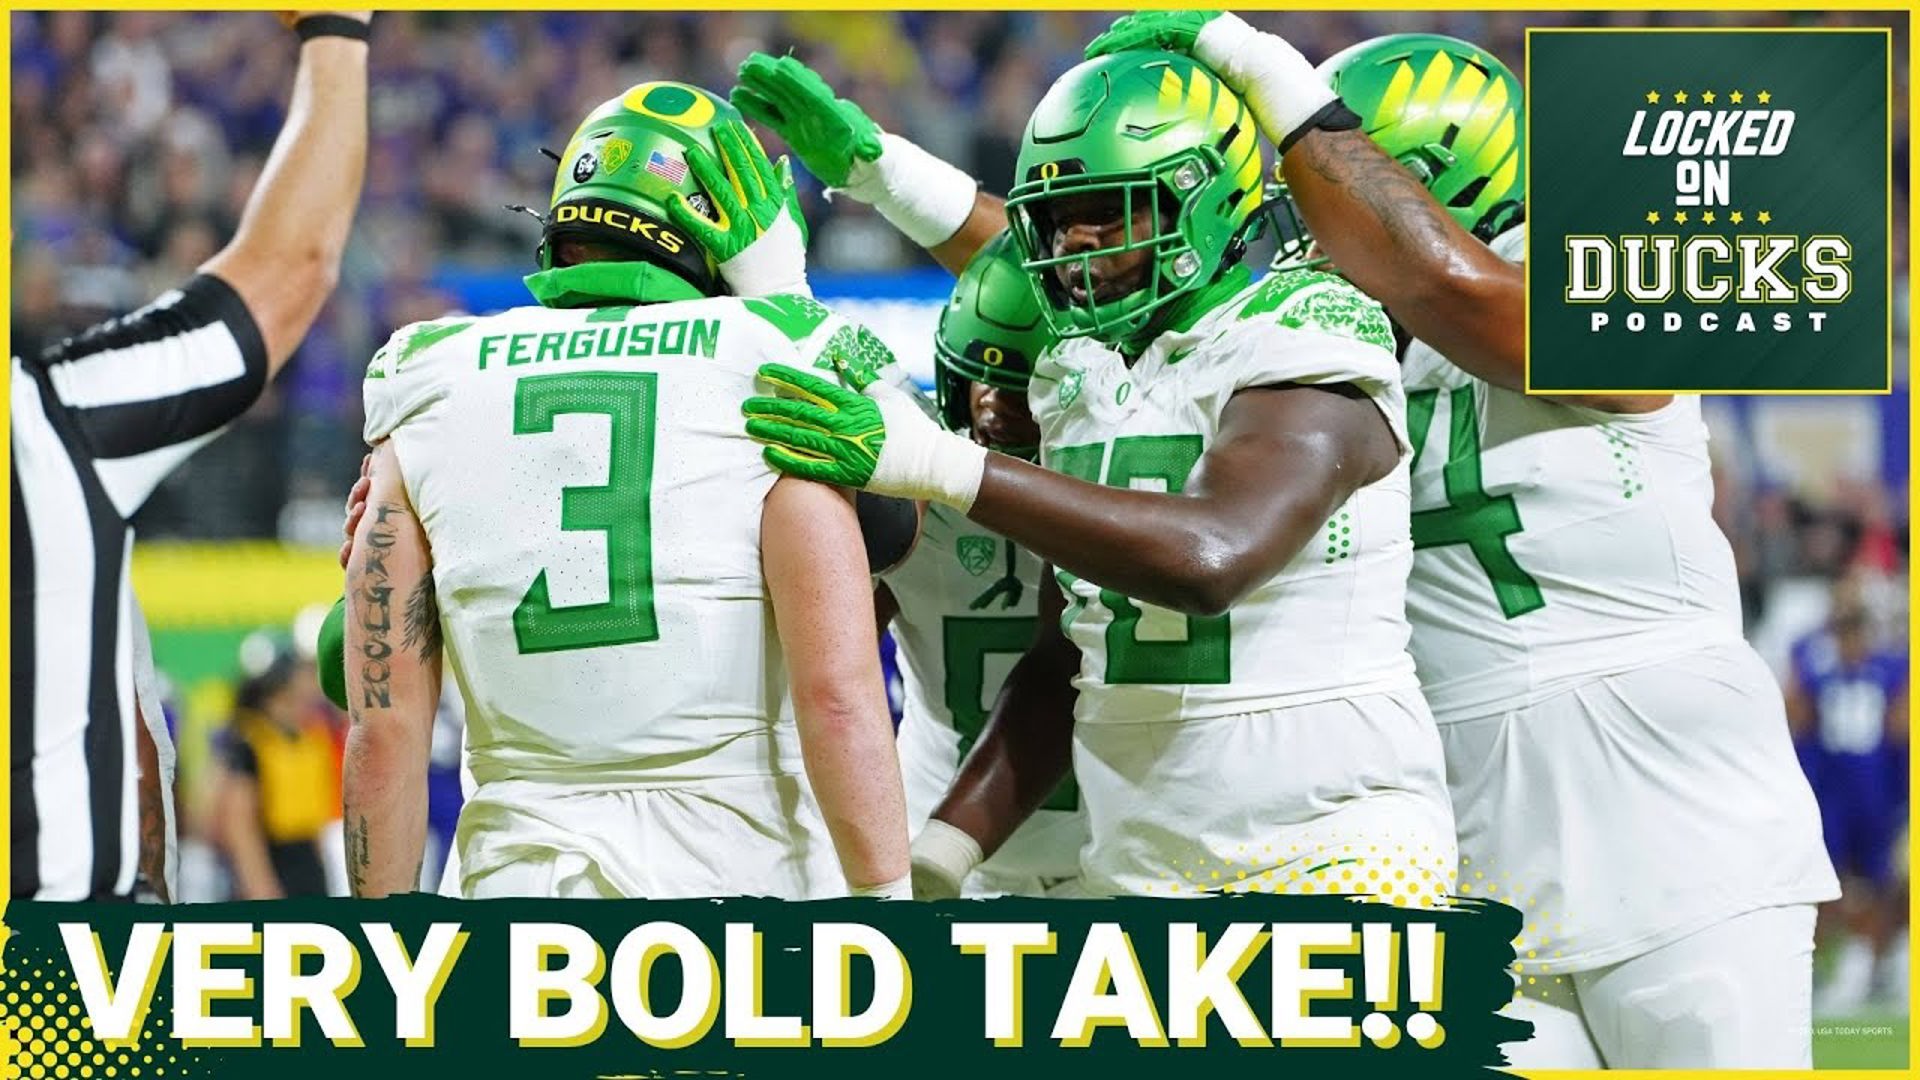 A mailbag question came in with a BOLD take that Oregon's home crowd will propel them to a double-digit win over the Buckeyes.